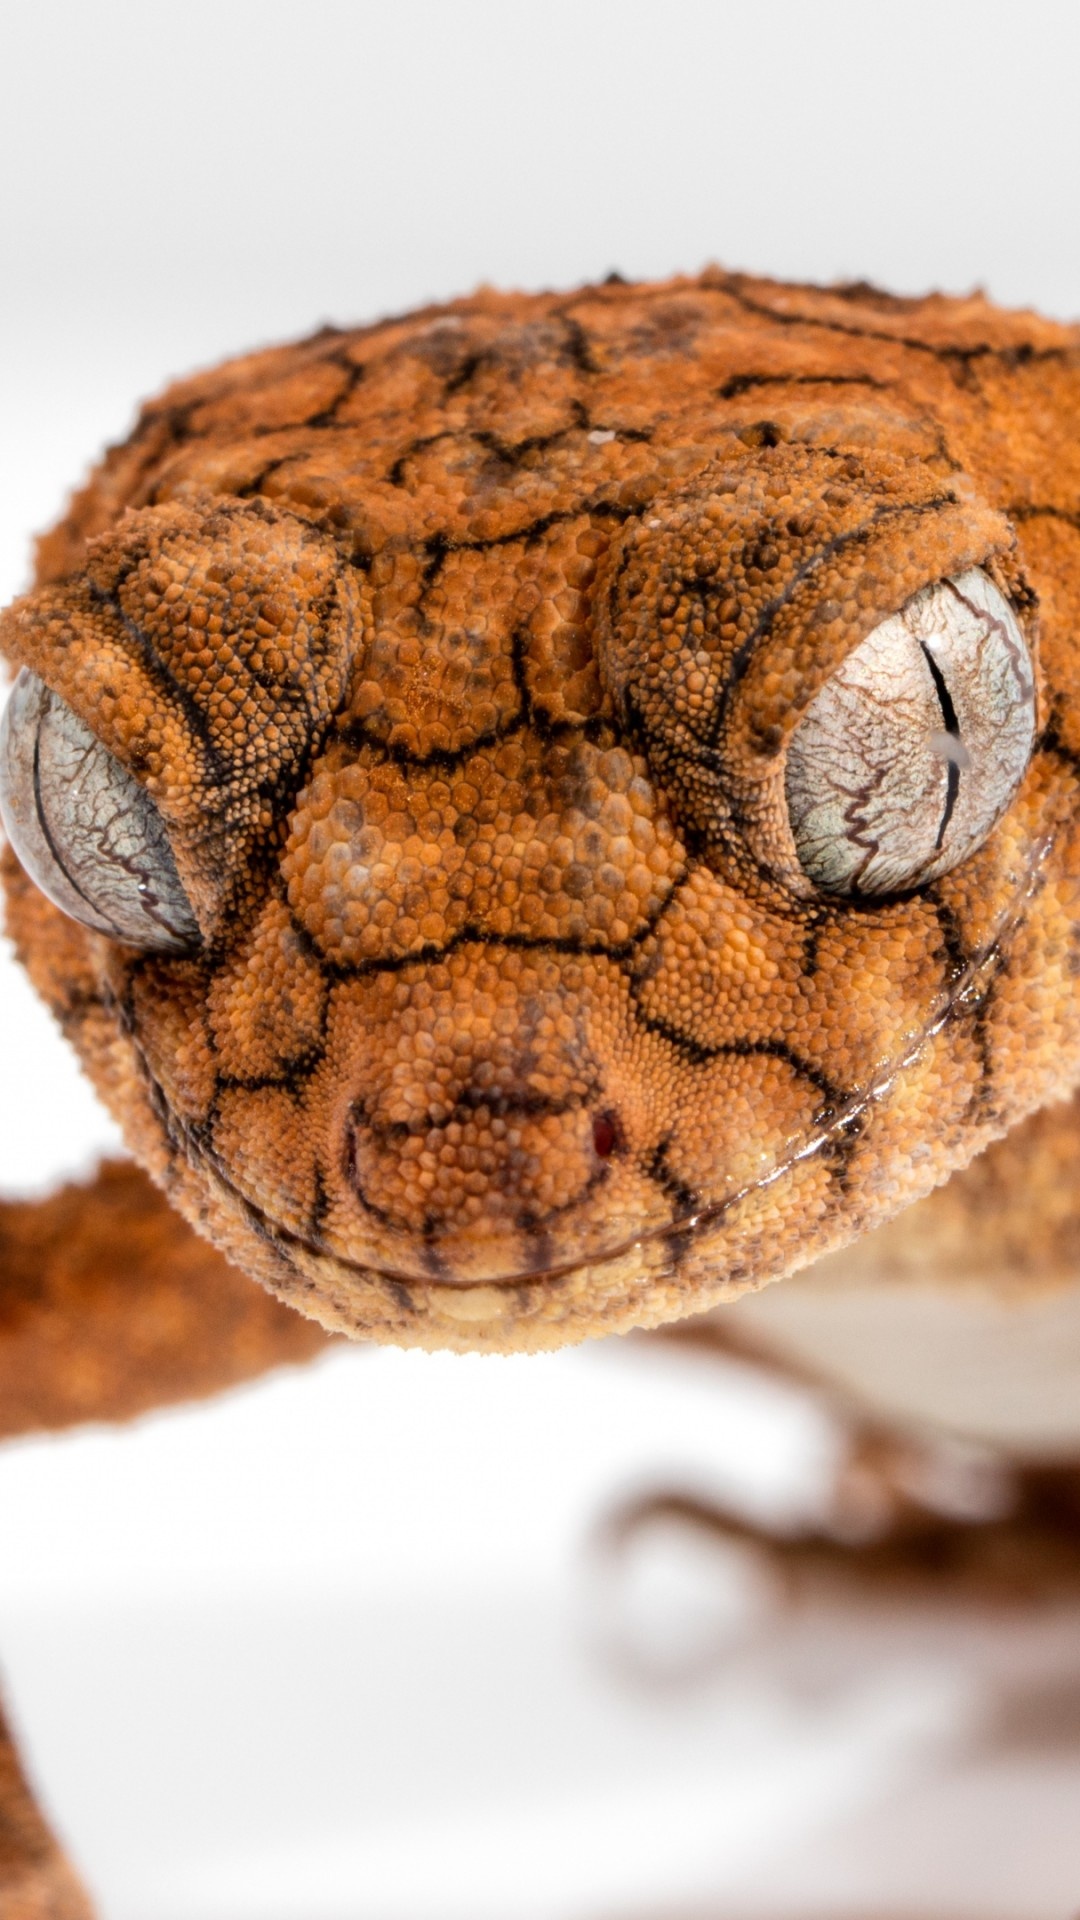 Gecko: Correlophus ciliatus, Described by French zoologist Alphonse Guichenot, 1866. 1080x1920 Full HD Background.